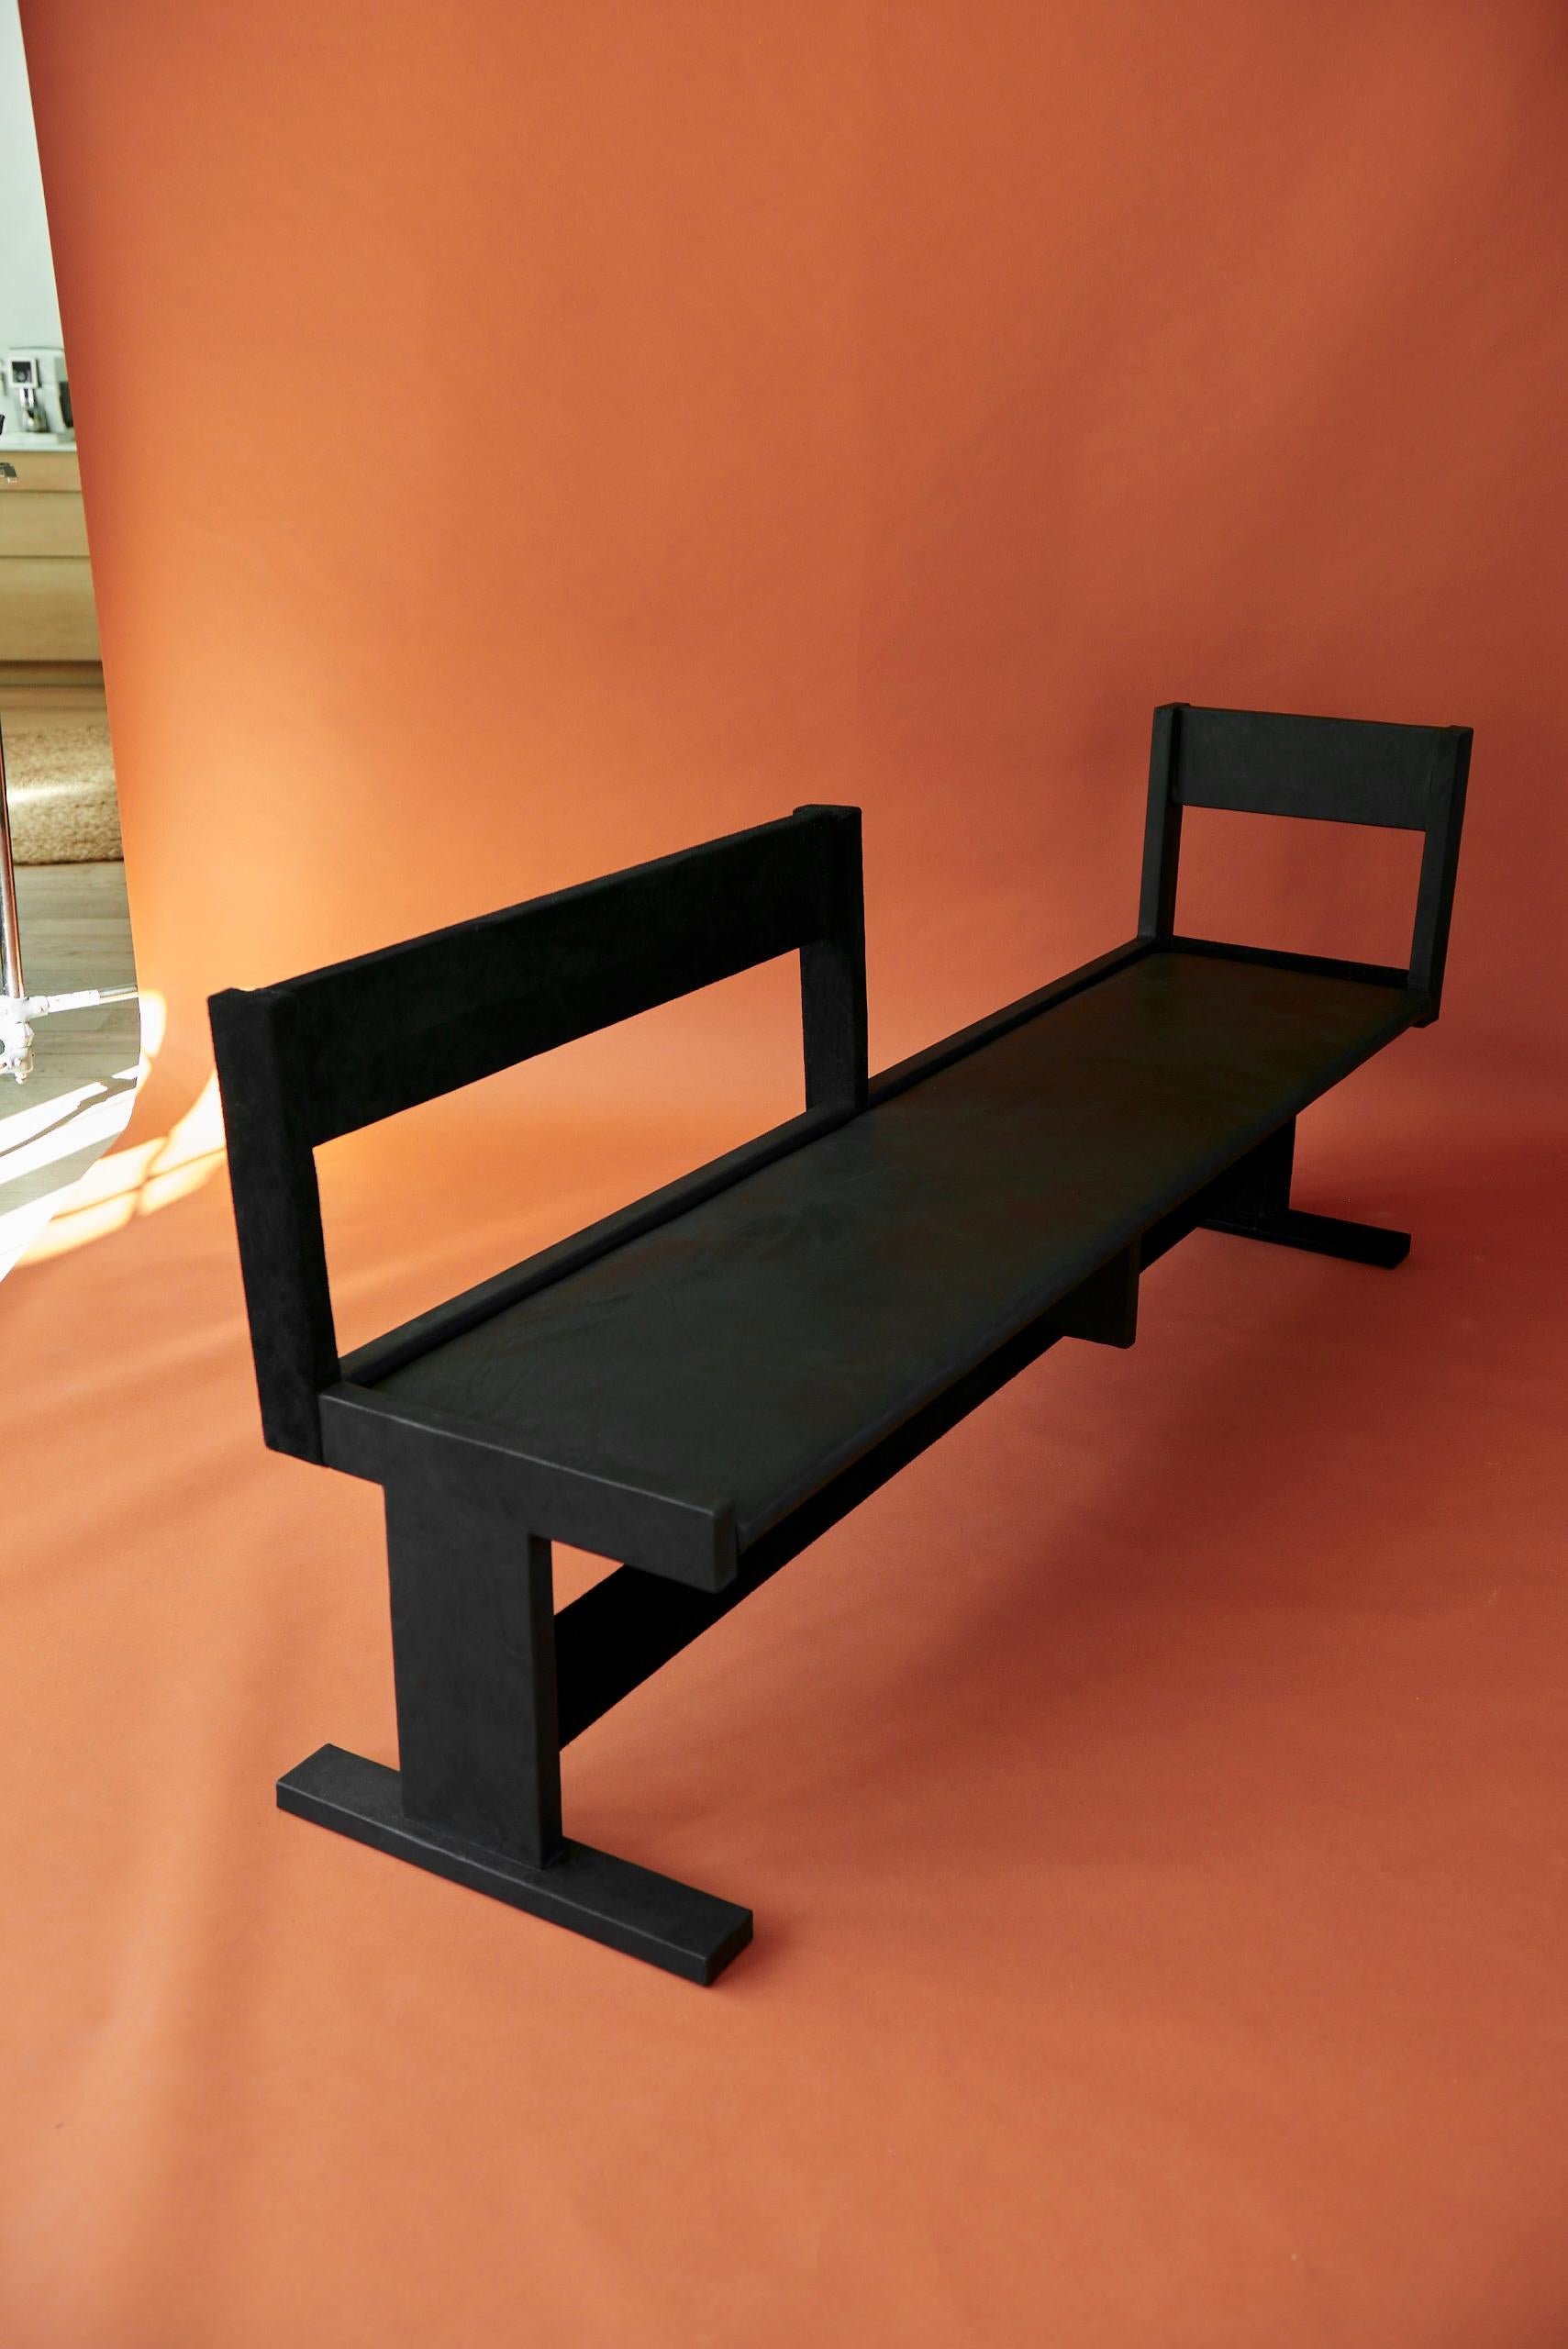 Limited Edition Leather Keeva Bench by Nish Studio
Dimensions: W 52.5 x D 206 x H 84.5cm.
Materials: Black Diesel leather + SUEDE

N I S H is a Cape Town based Fashion and Furniture design studio. N I S H creates contemporary, elegant and